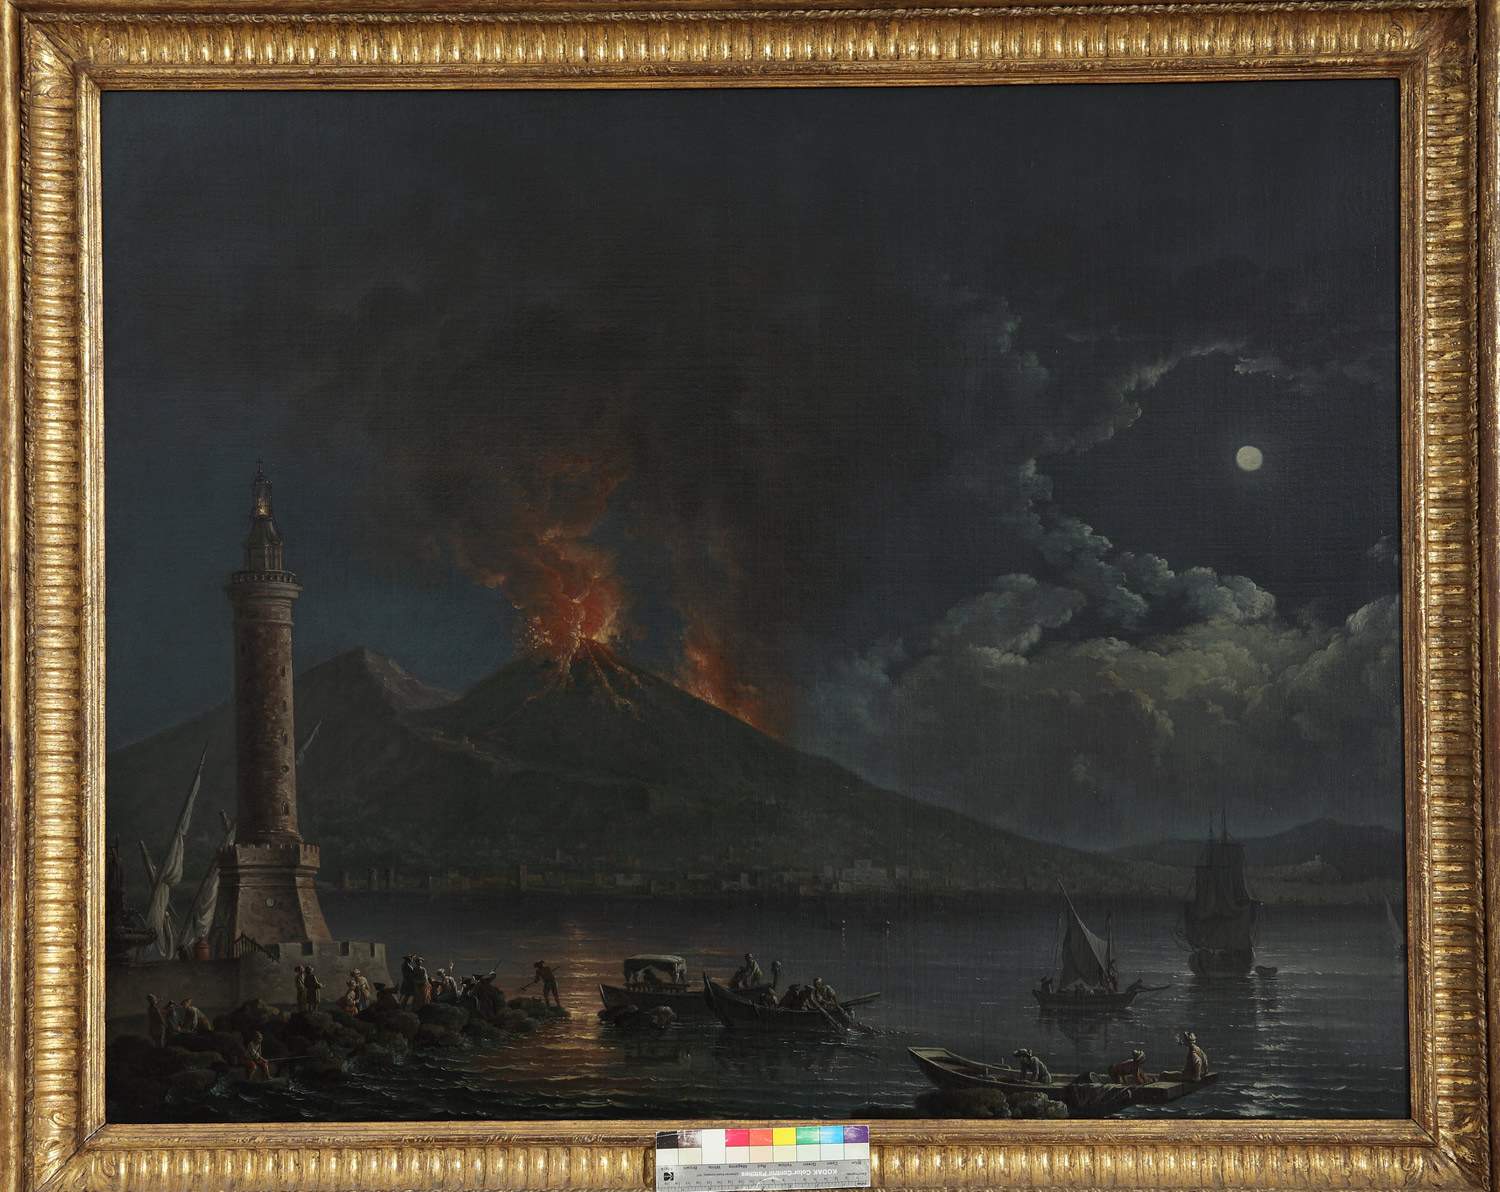 Vesuvius in art history from De Nittis to Burri and Warhol, between fascination and fear. On display in Naples